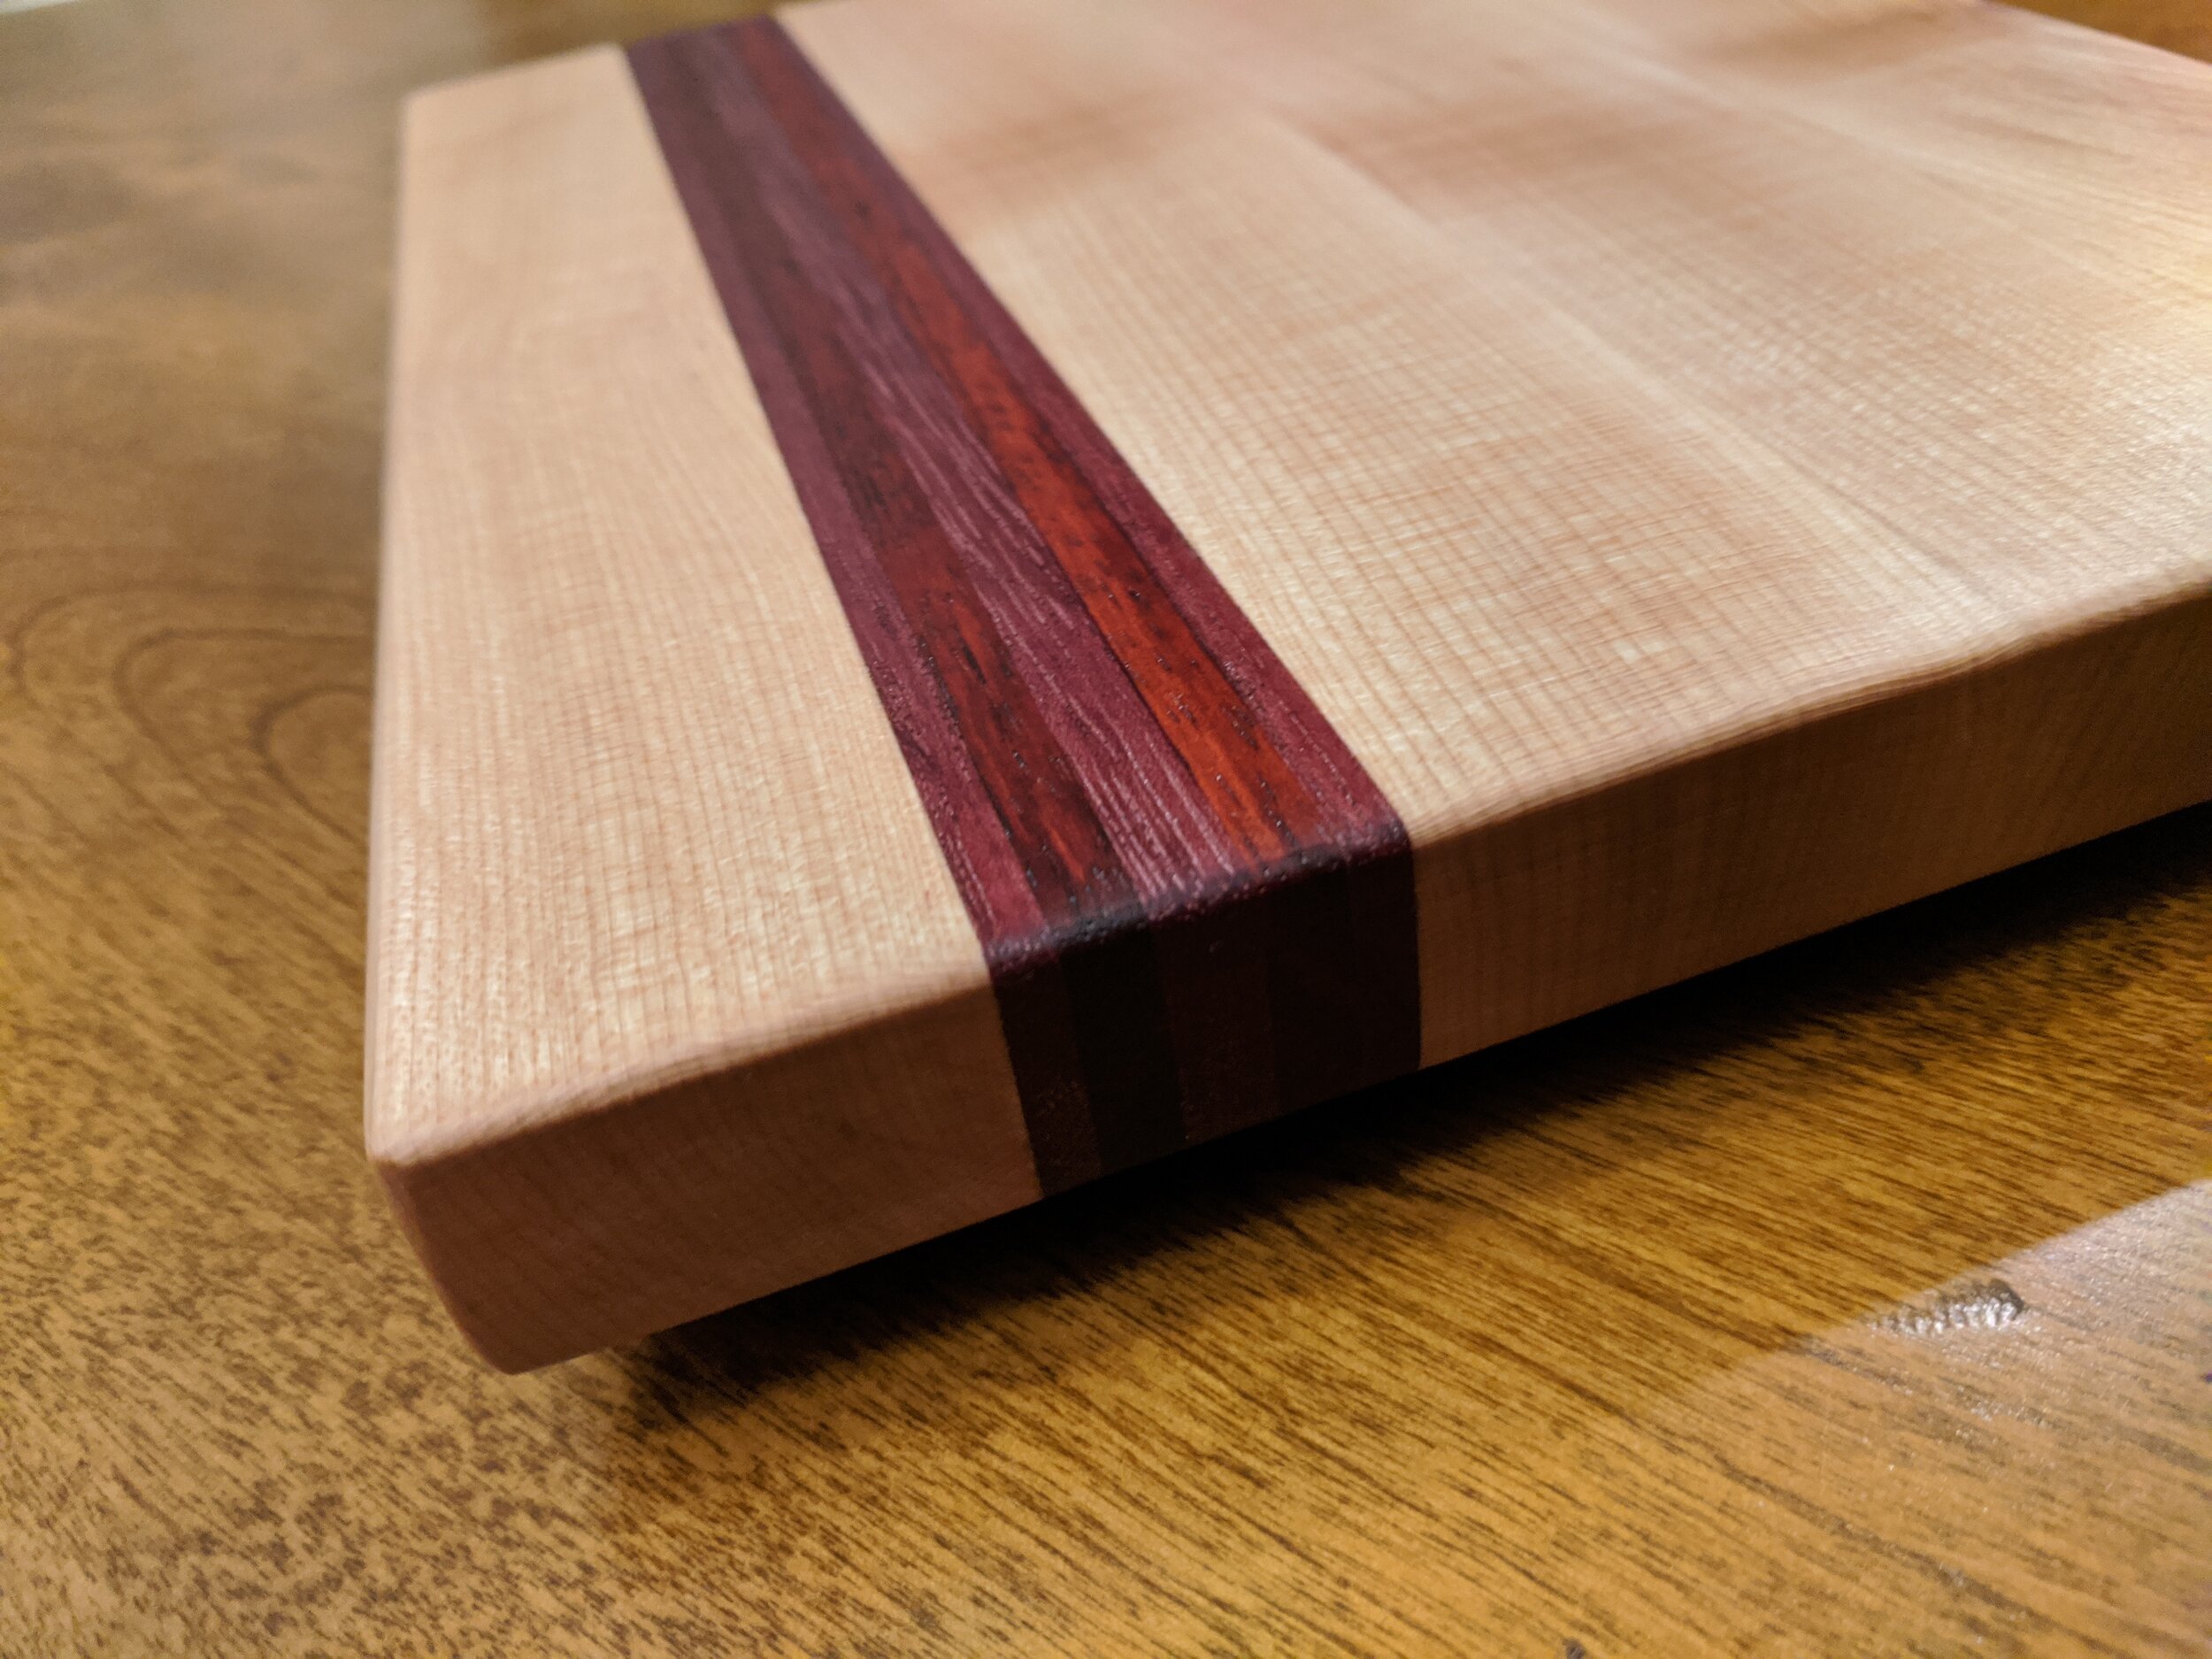 Purpleheart and Maple Striped Cutting Board